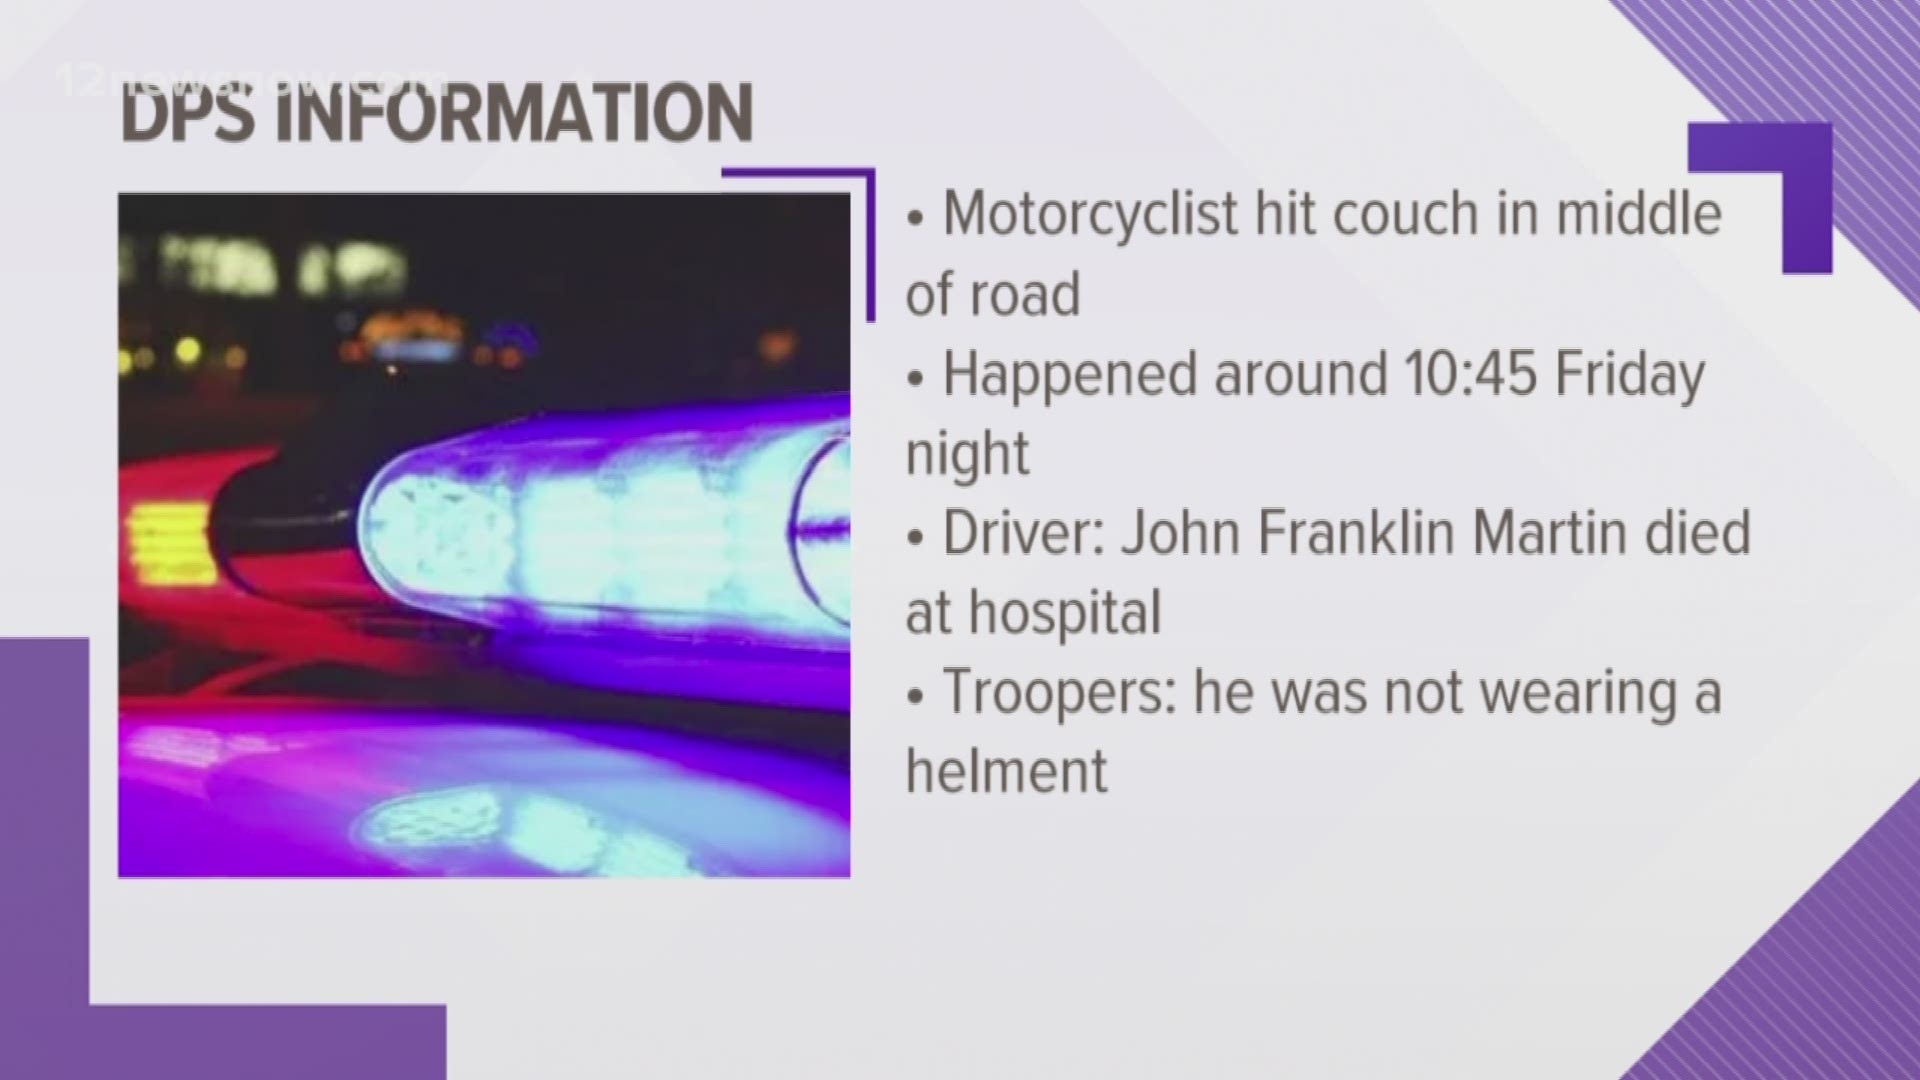 A Buna man died after he crashed his motorcycle into a couch in the middle of I-10 late Friday night near Rose City.